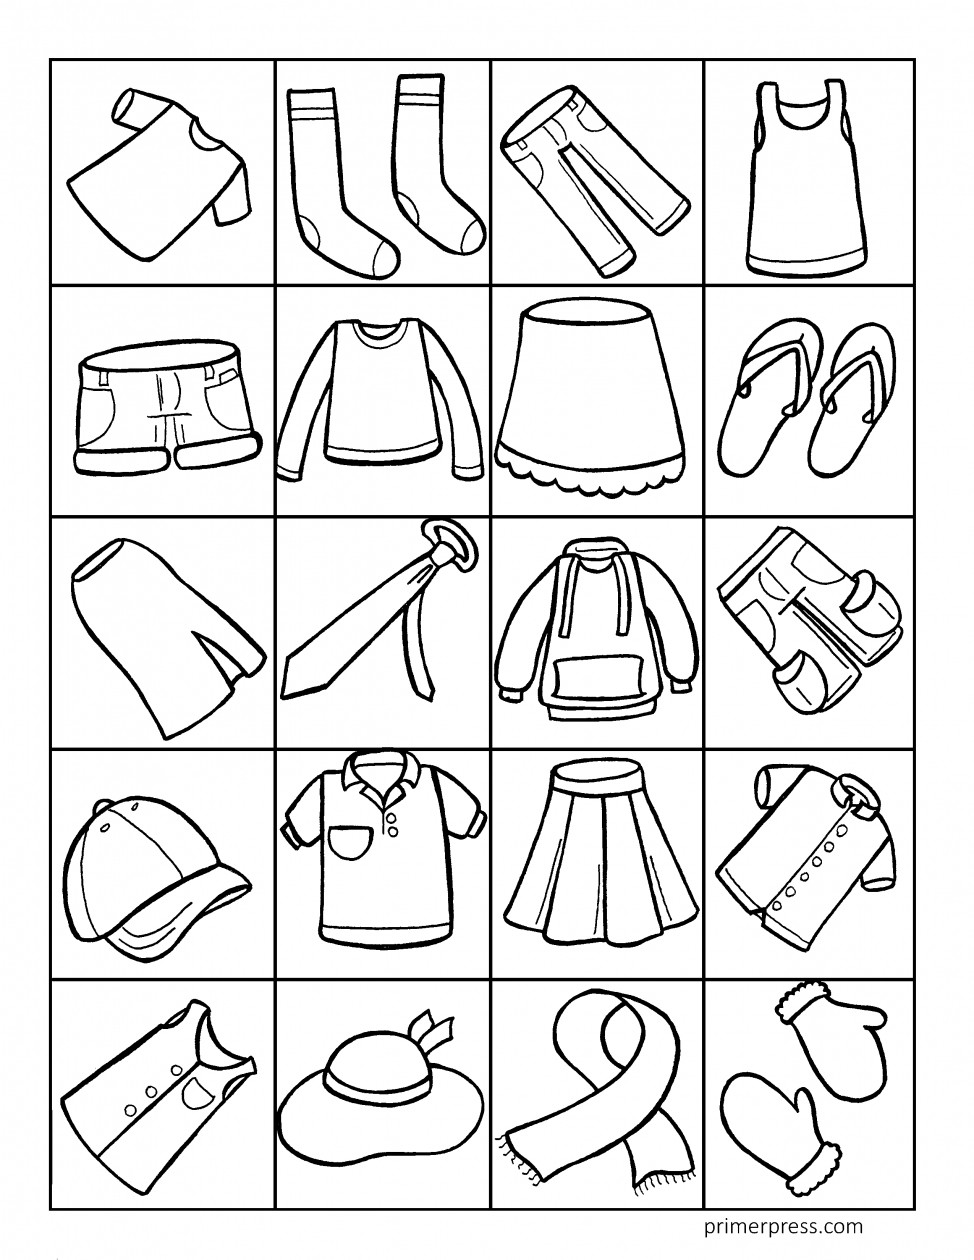 Clothing Coloring Pages Printables
 Clothing Coloring Pages for Preschoolers Collection